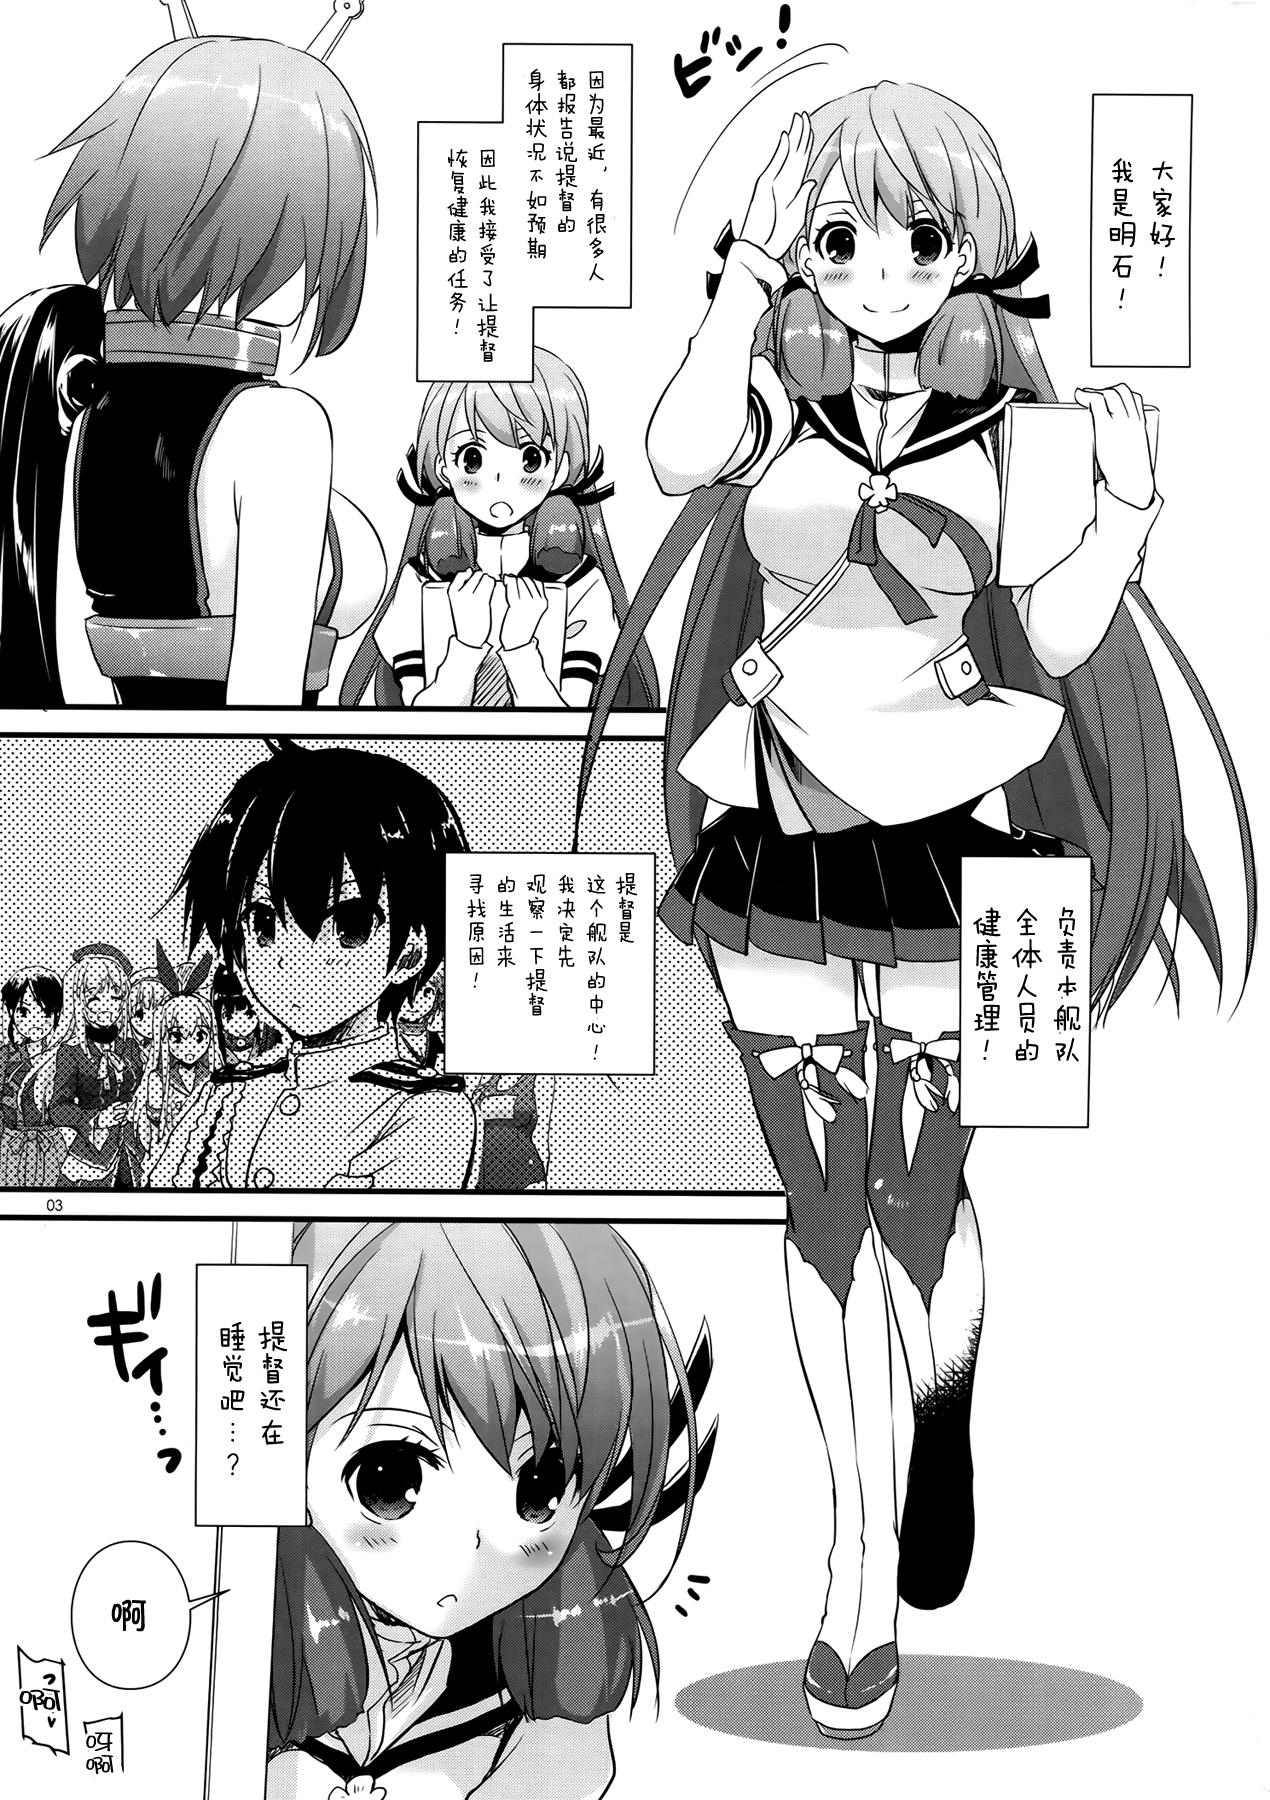 Shemale D.L. action 94 - Kantai collection Chat - Page 3